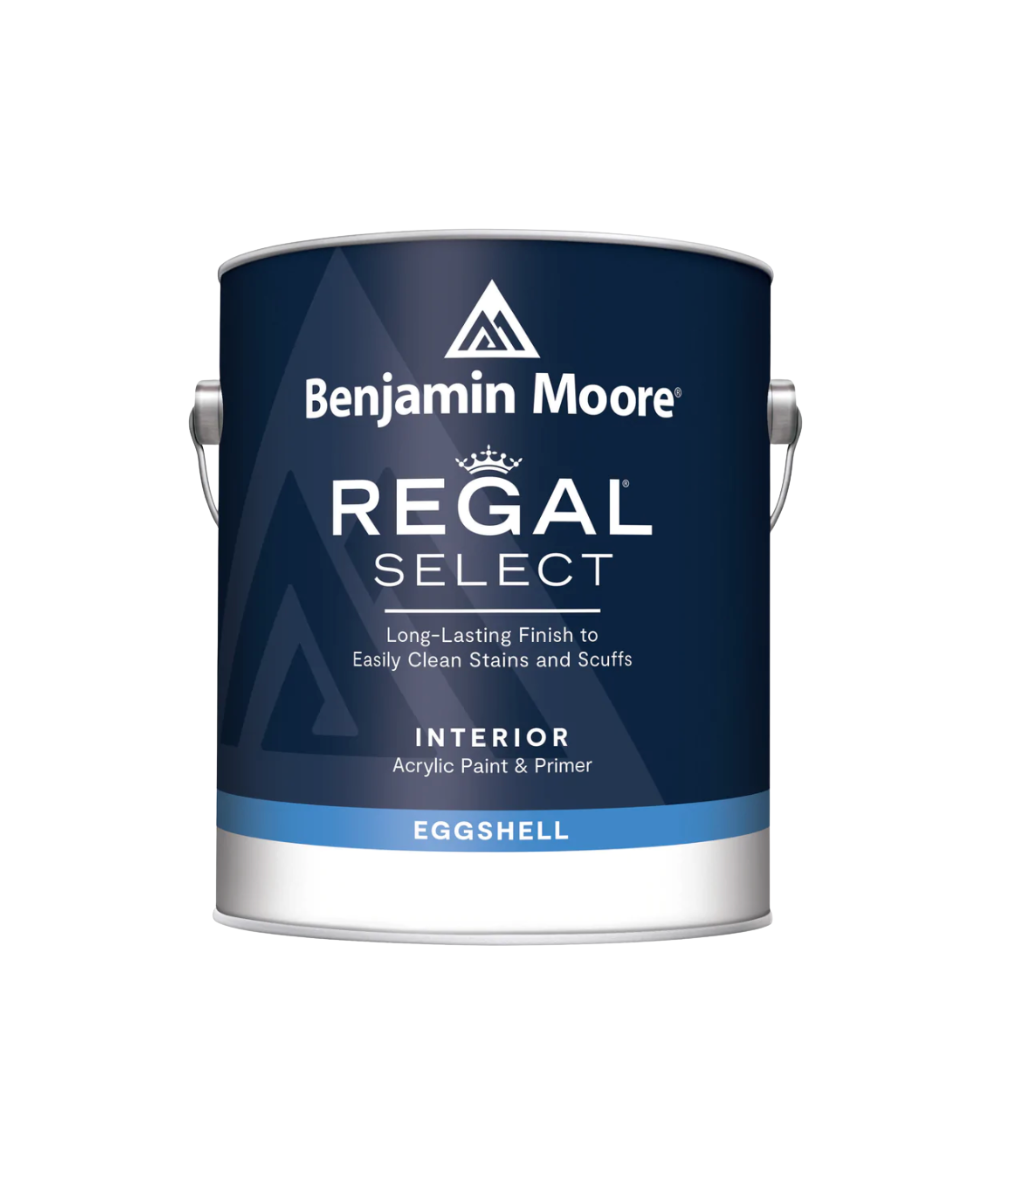 Benjamin Moore Regal Select Eggshell Paint available at Regal Paint Centers.